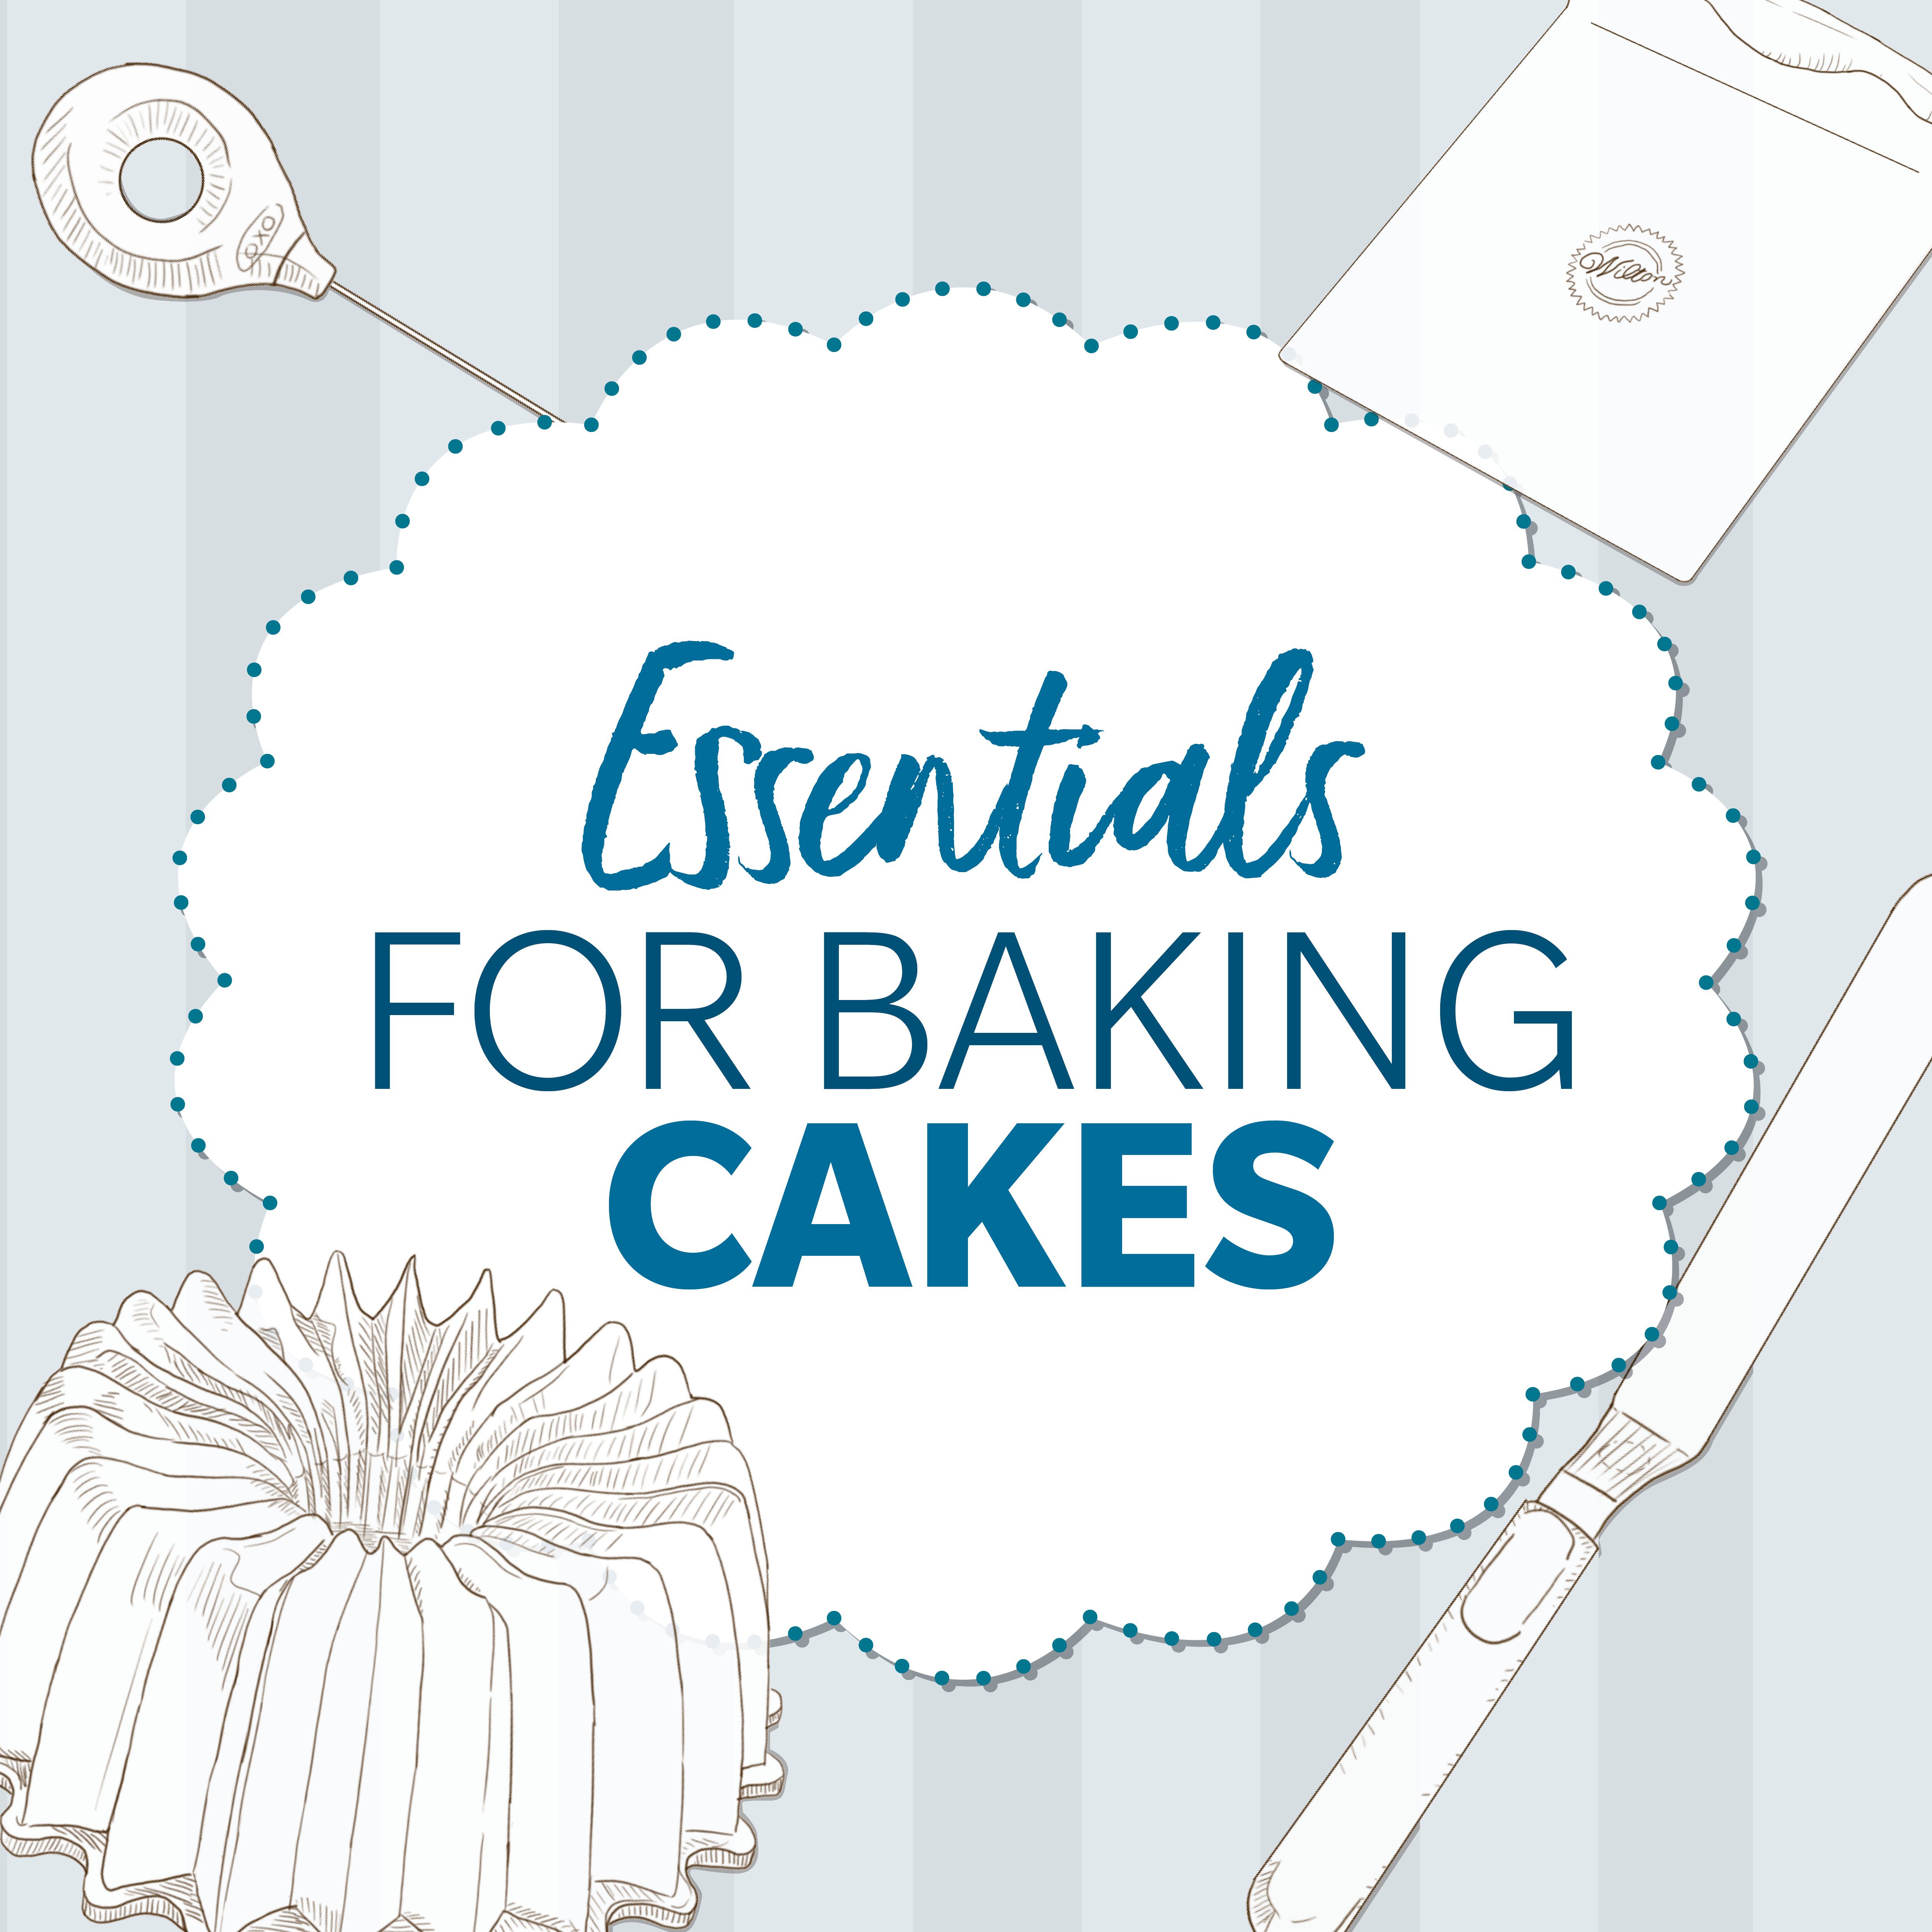 19 Cupcake and Cake Supplies Every Home Baker Needs